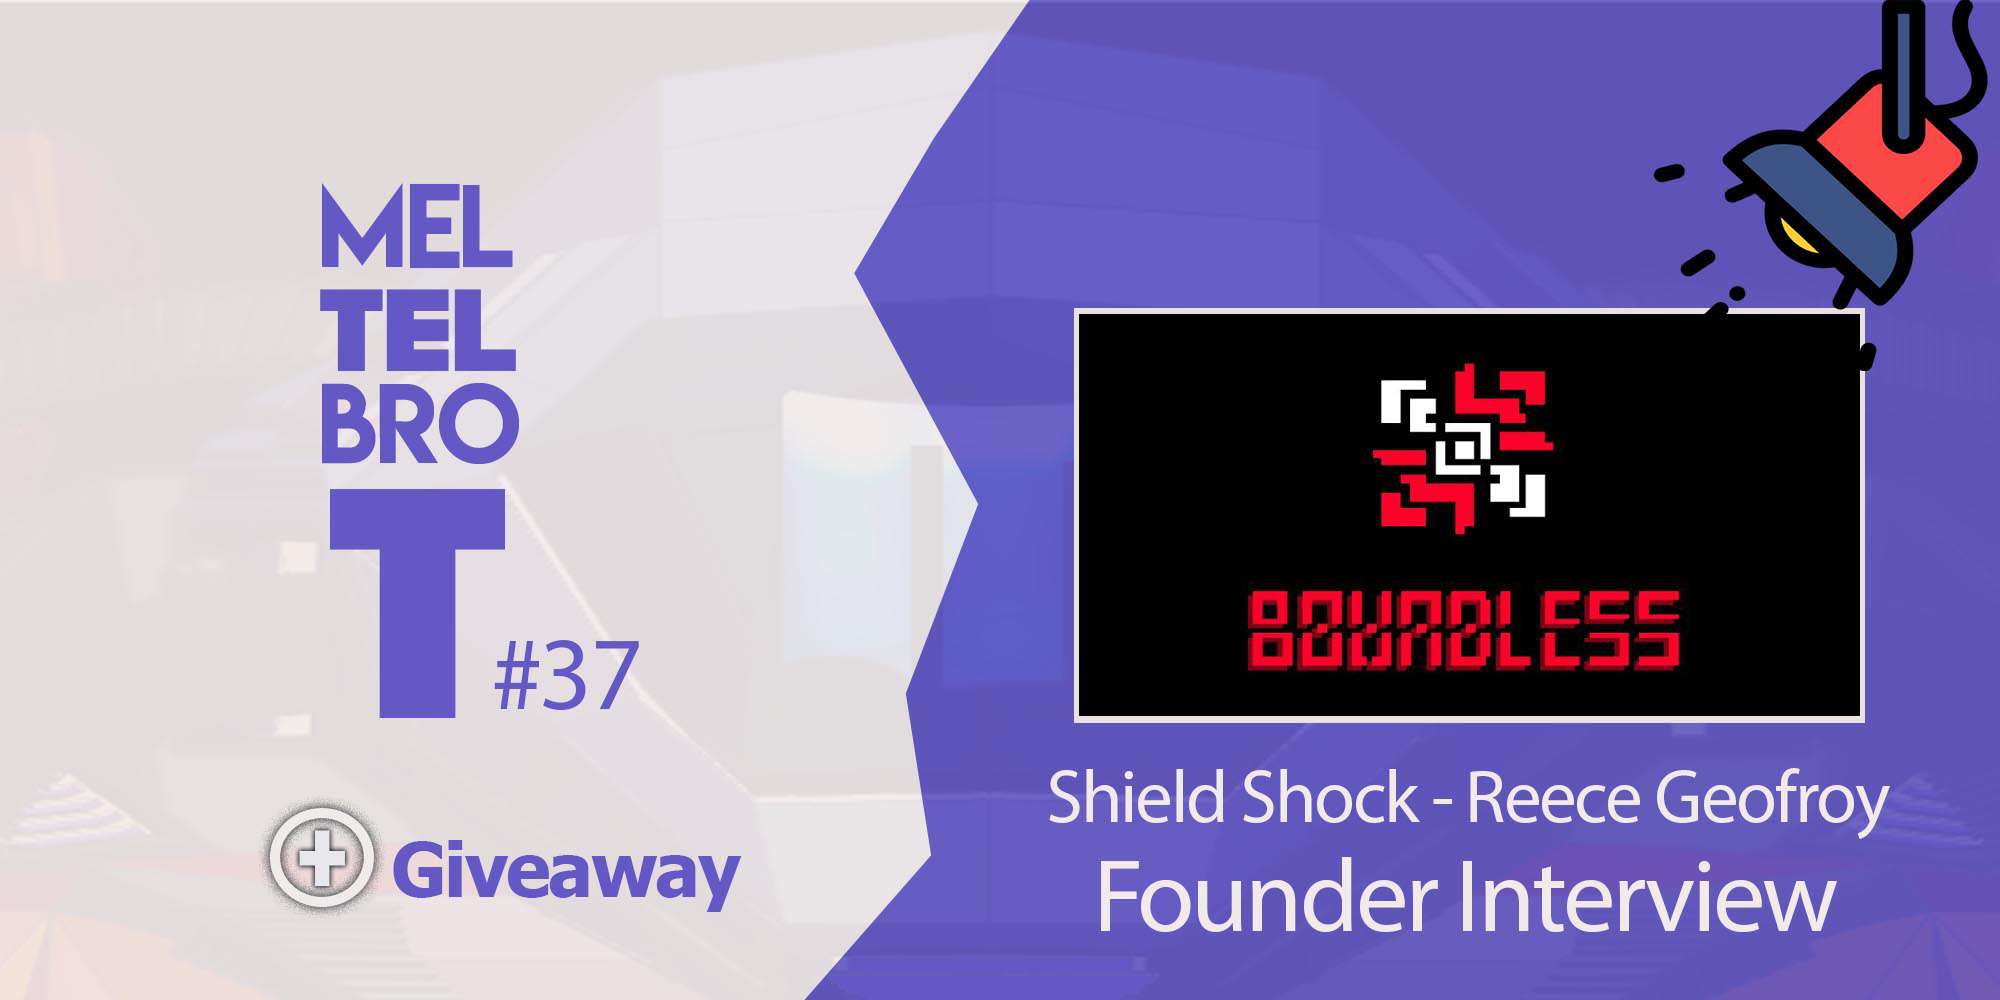 Meltelbrot shieldshock Today I’m chatting with Reece Geofroy of Boundless Studios, the indie developer behind a new game, Shield Shock, that is looking to utilise the Enjin blockchain gaming solution. The game itself is a 2D Fighter Platformer Game all about blocking enemy projectiles with your shield, and releasing mighty attacks right back. They intend to develop a 4 Player Party Fighting Game based around this mechanic of defence, and plan to offer various types of characters, stages, items and modes. It is still currently in development but the game is set to be released soon. Let’s find out more from Reece himself!